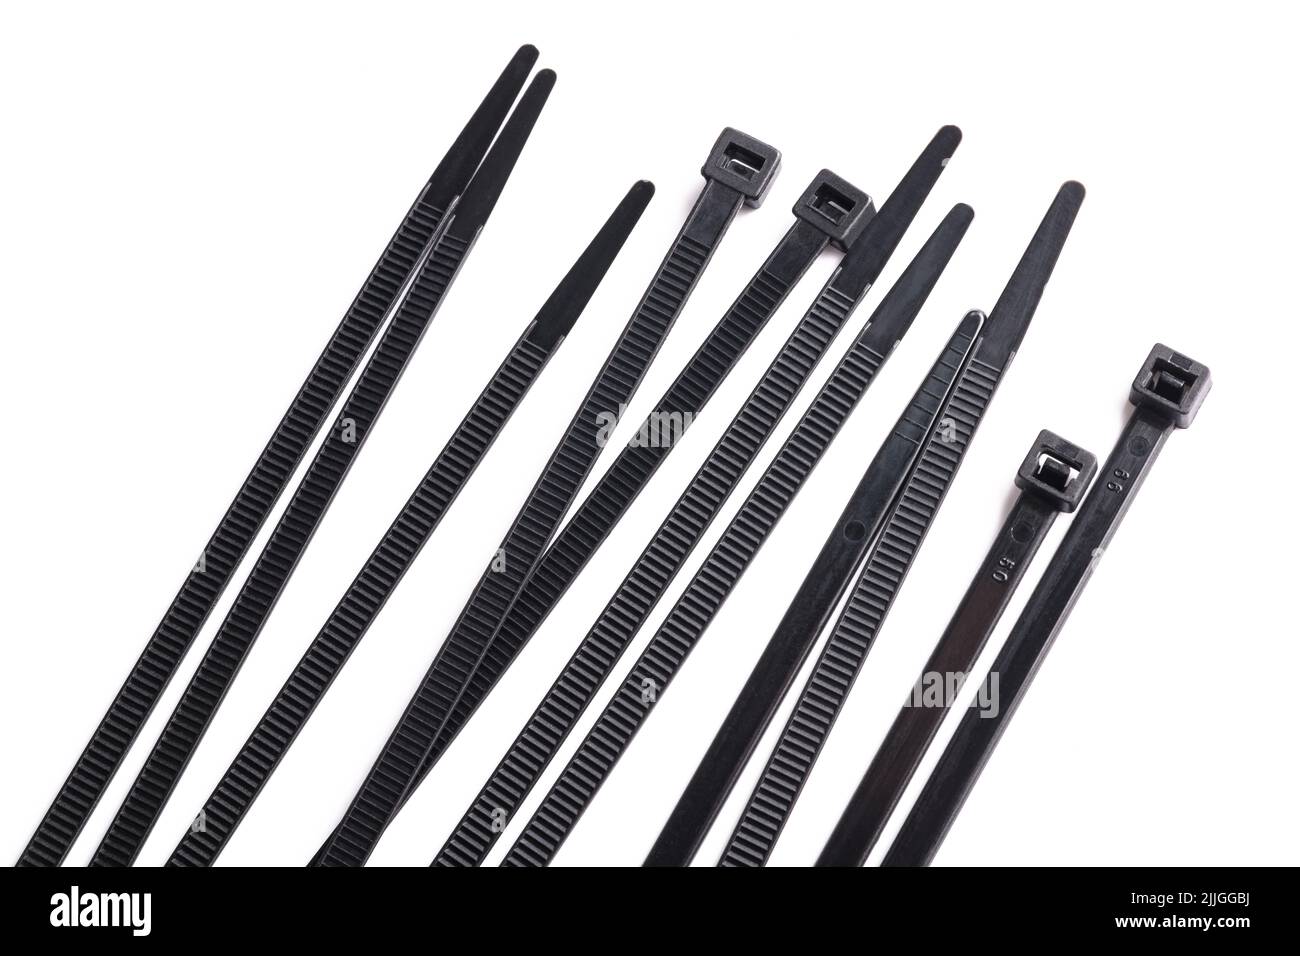 Multi-Purpose Self-Locking Nylon Cable Ties Cord Management Ties isolated on white Stock Photo